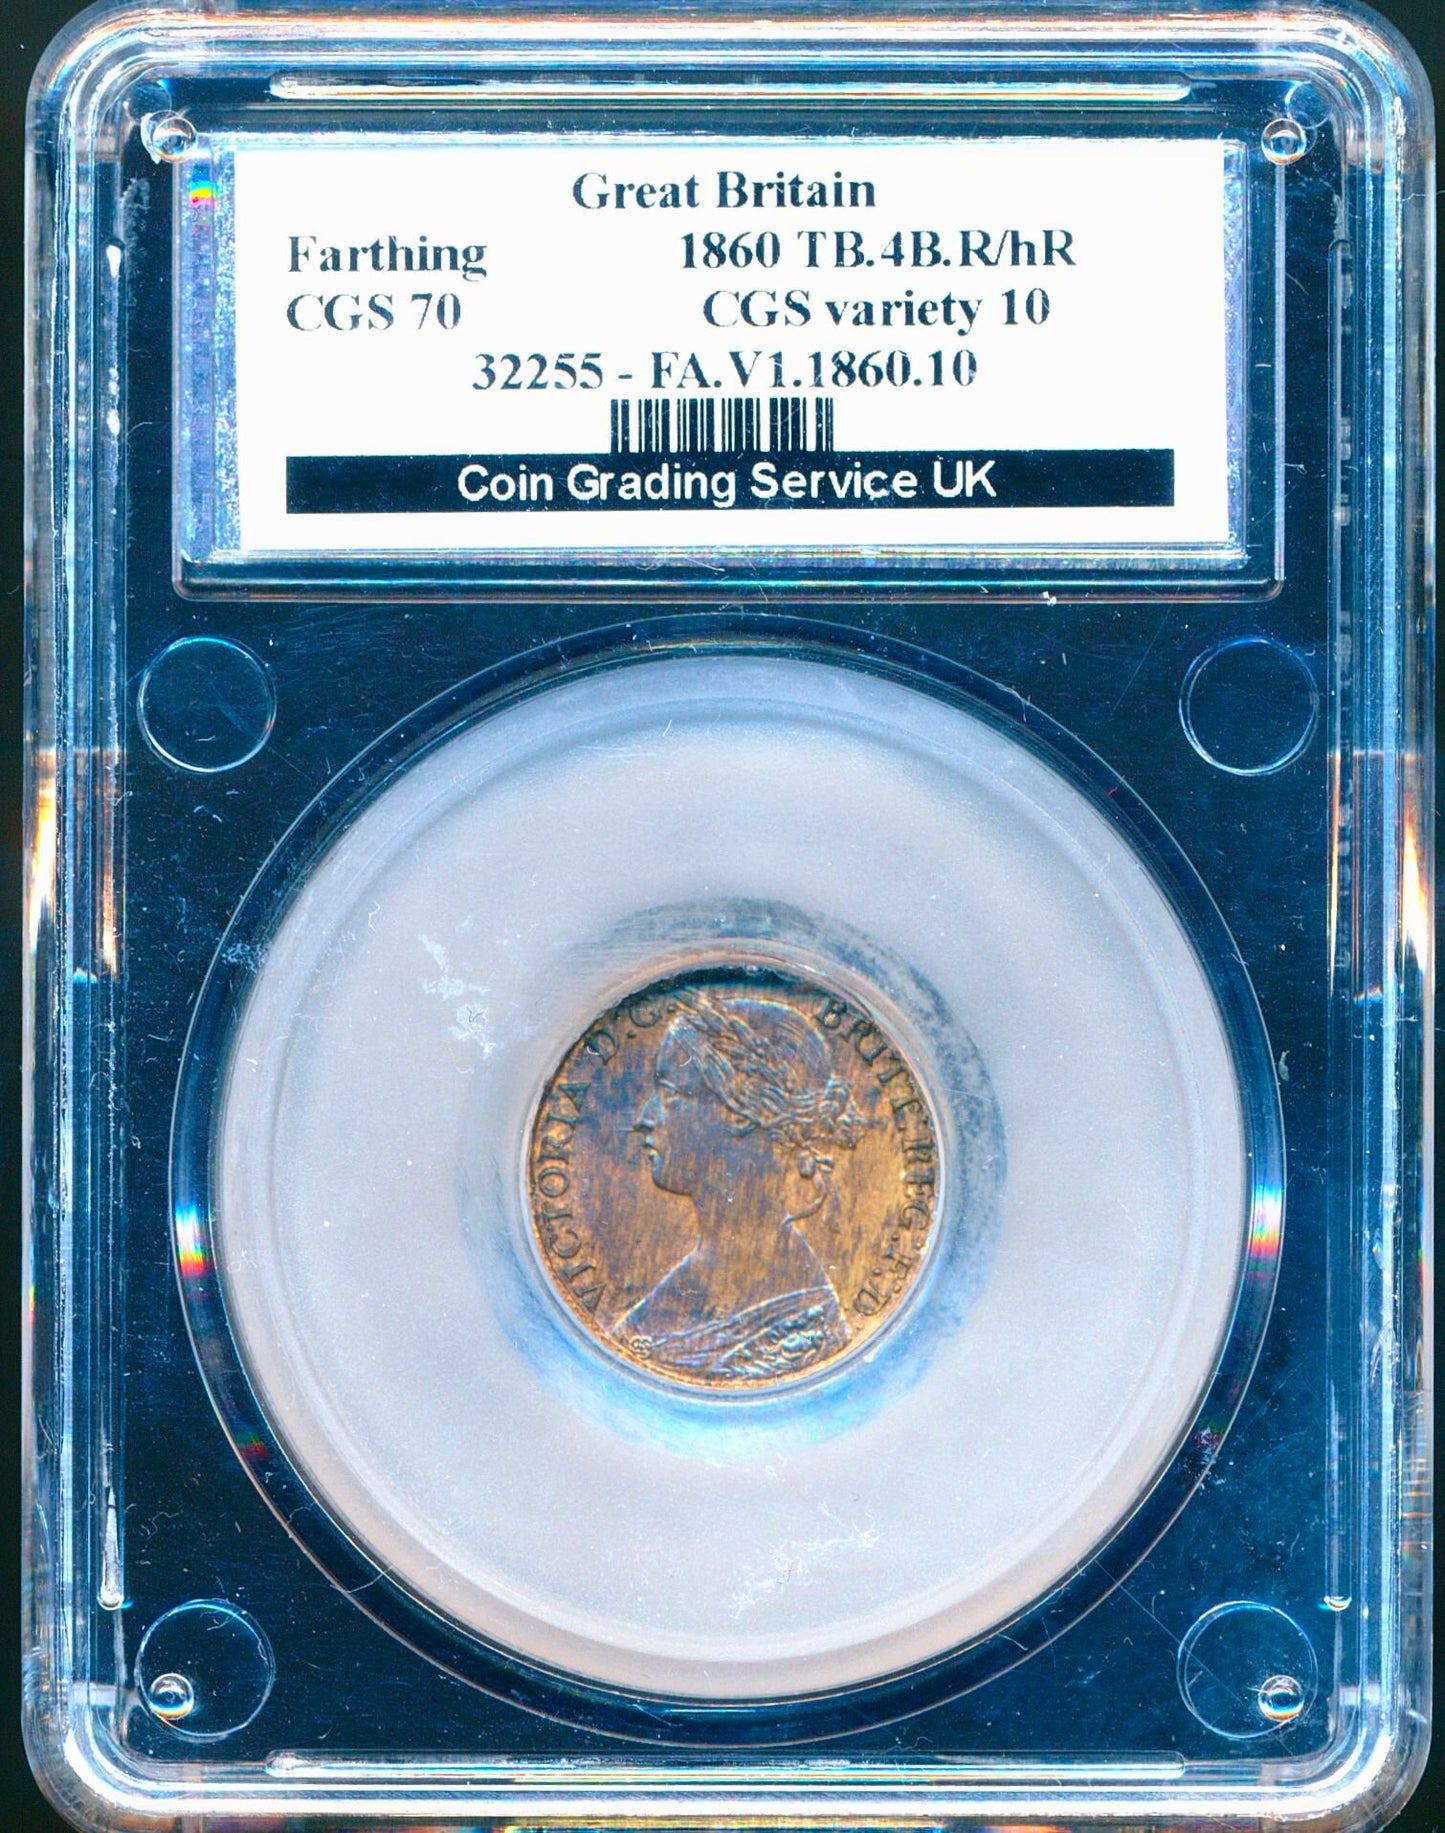 1860 Farthing S3958 F 499 R over higher R in REG CGS70 AUNC